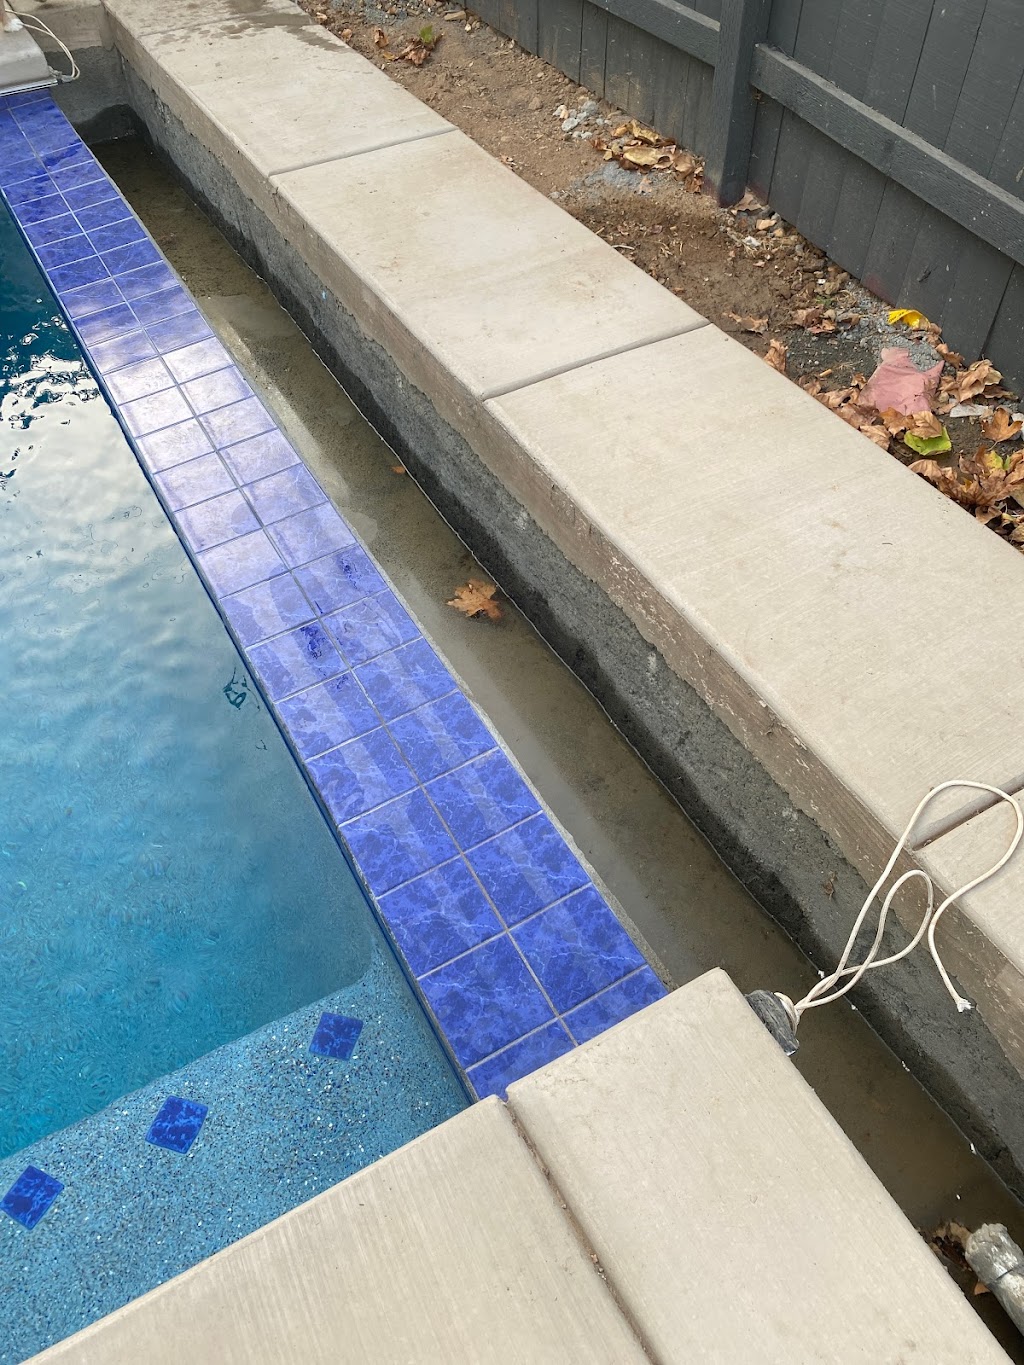 Aquamatic Cover Systems | 200 Mayock Rd, Gilroy, CA 95020 | Phone: (408) 846-9274